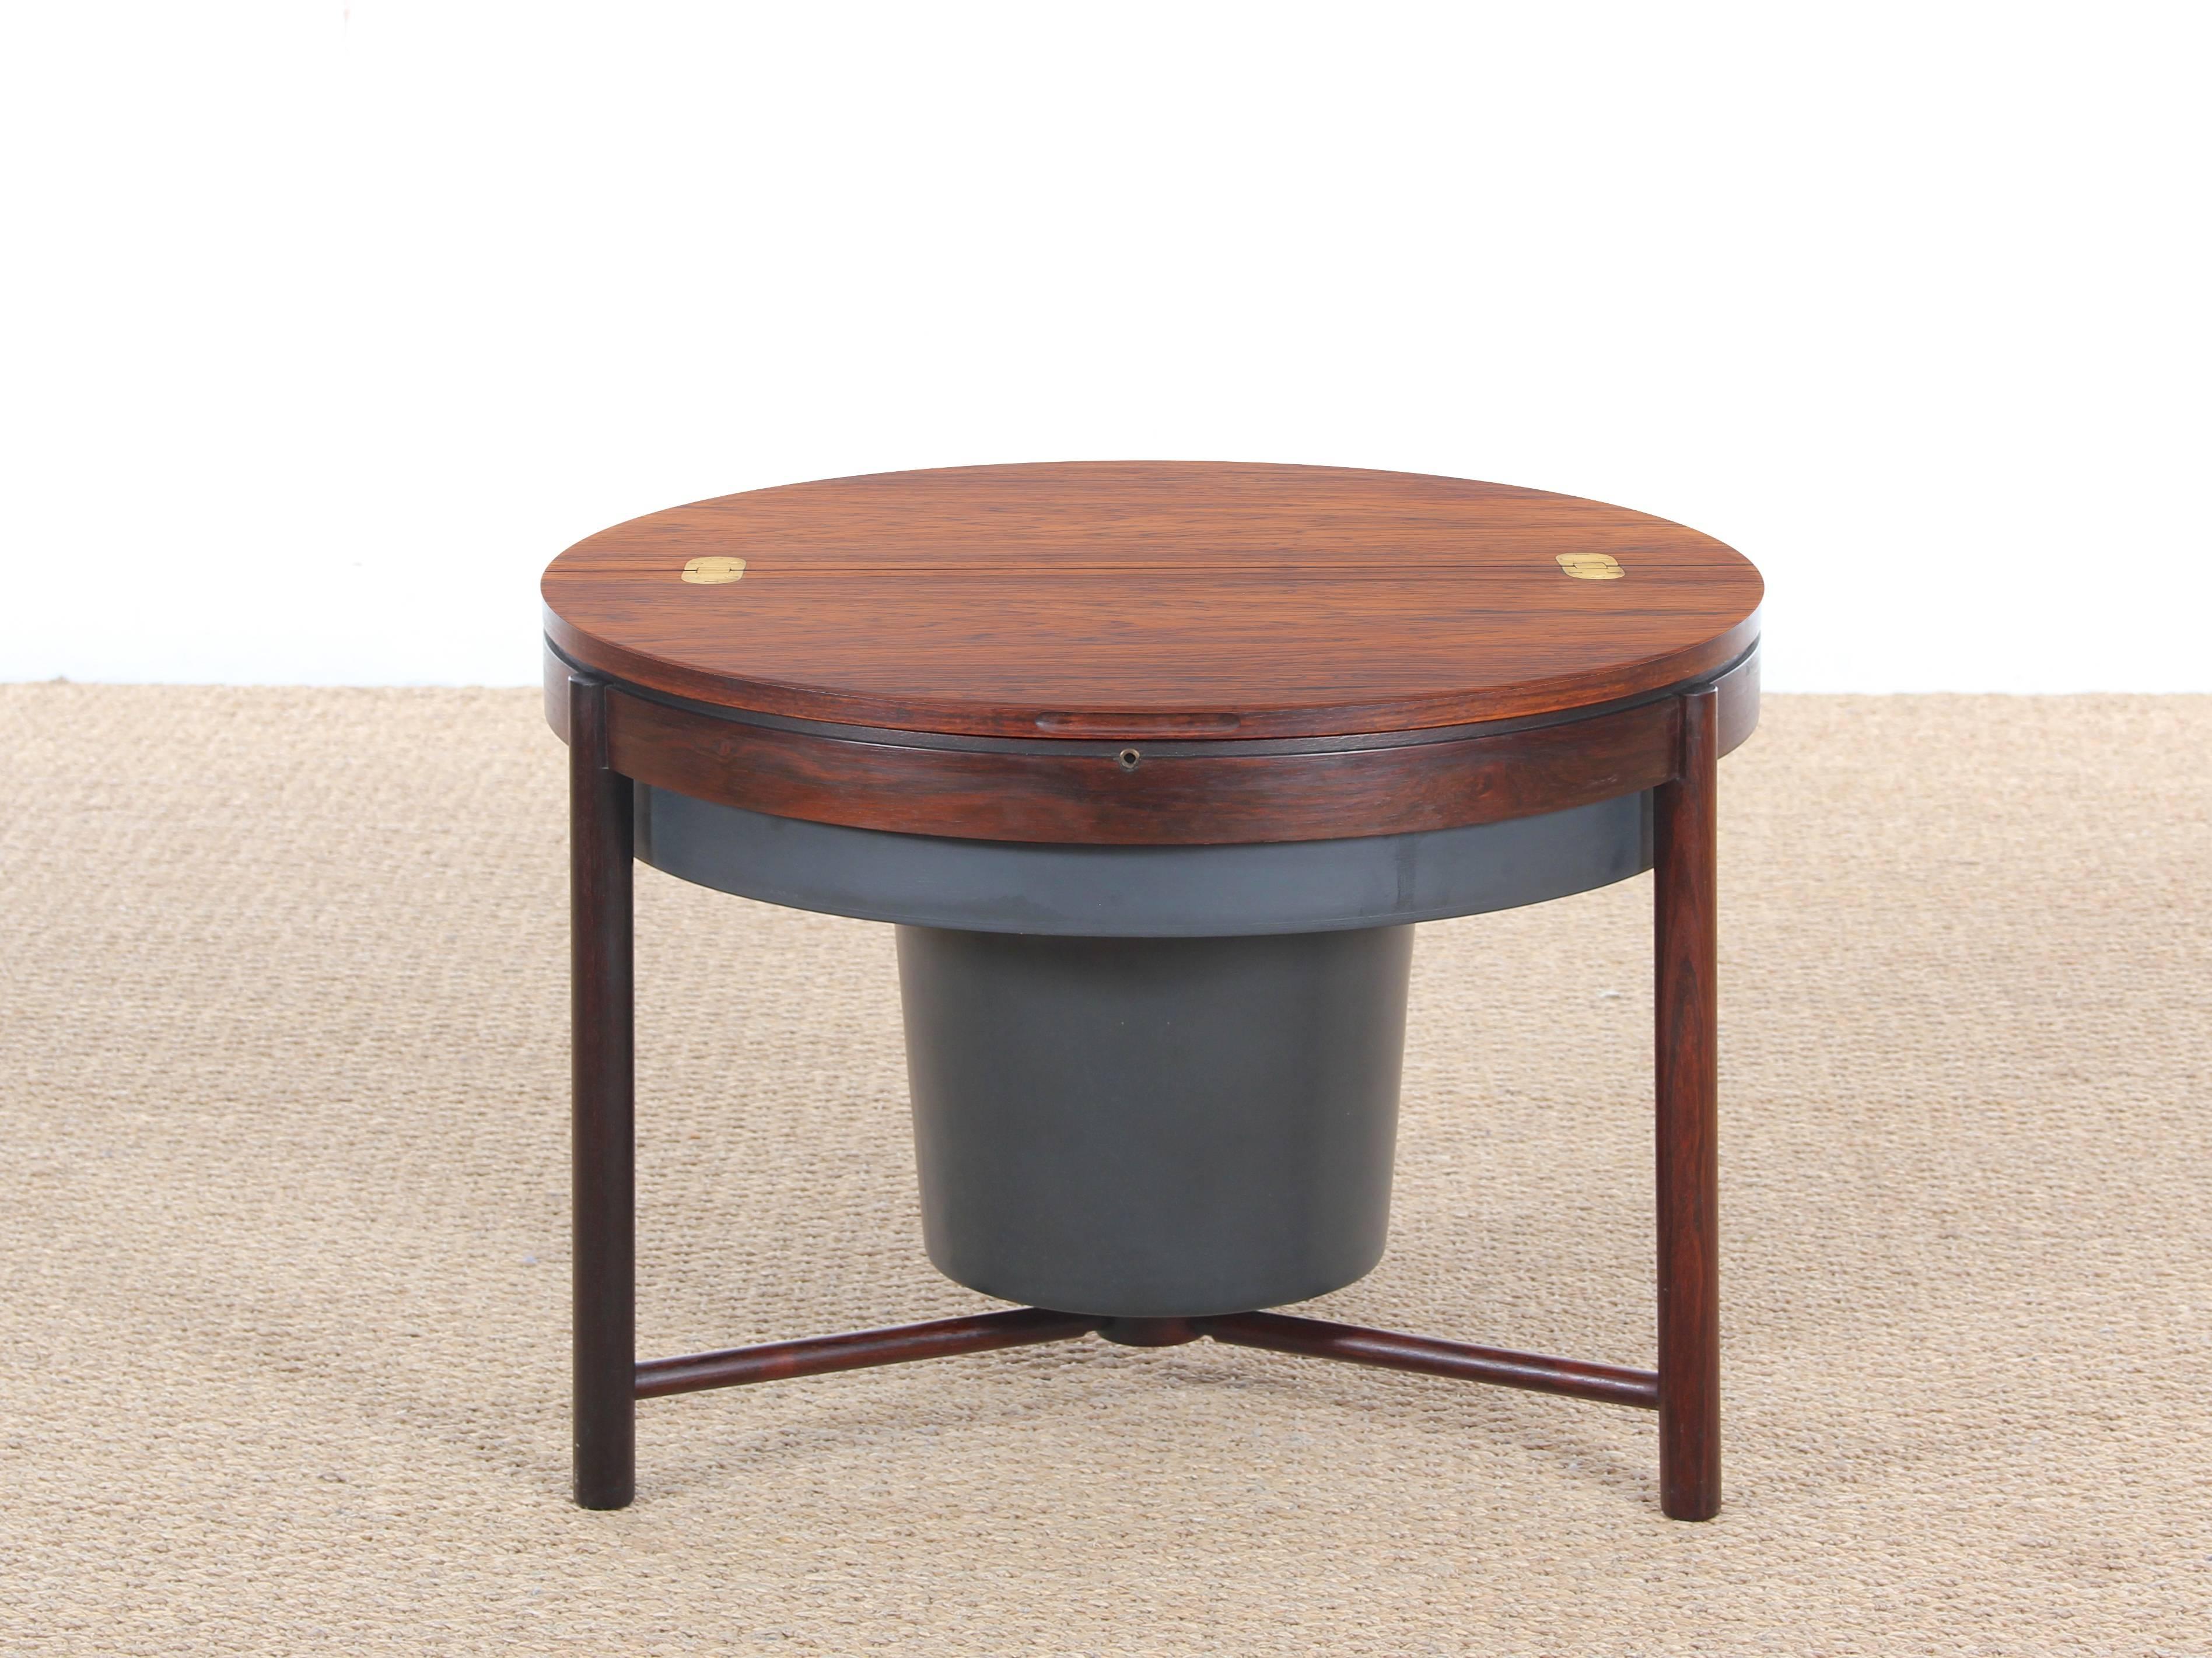 Rosewood coffee bar table and Rolf Adolf Relling Rastad in 1962. Consituée a circular plate whose moitiée gets up and opens on a rotating casing Publisher accommodate glasses and bottles . This highly original and ingenious system first designed for